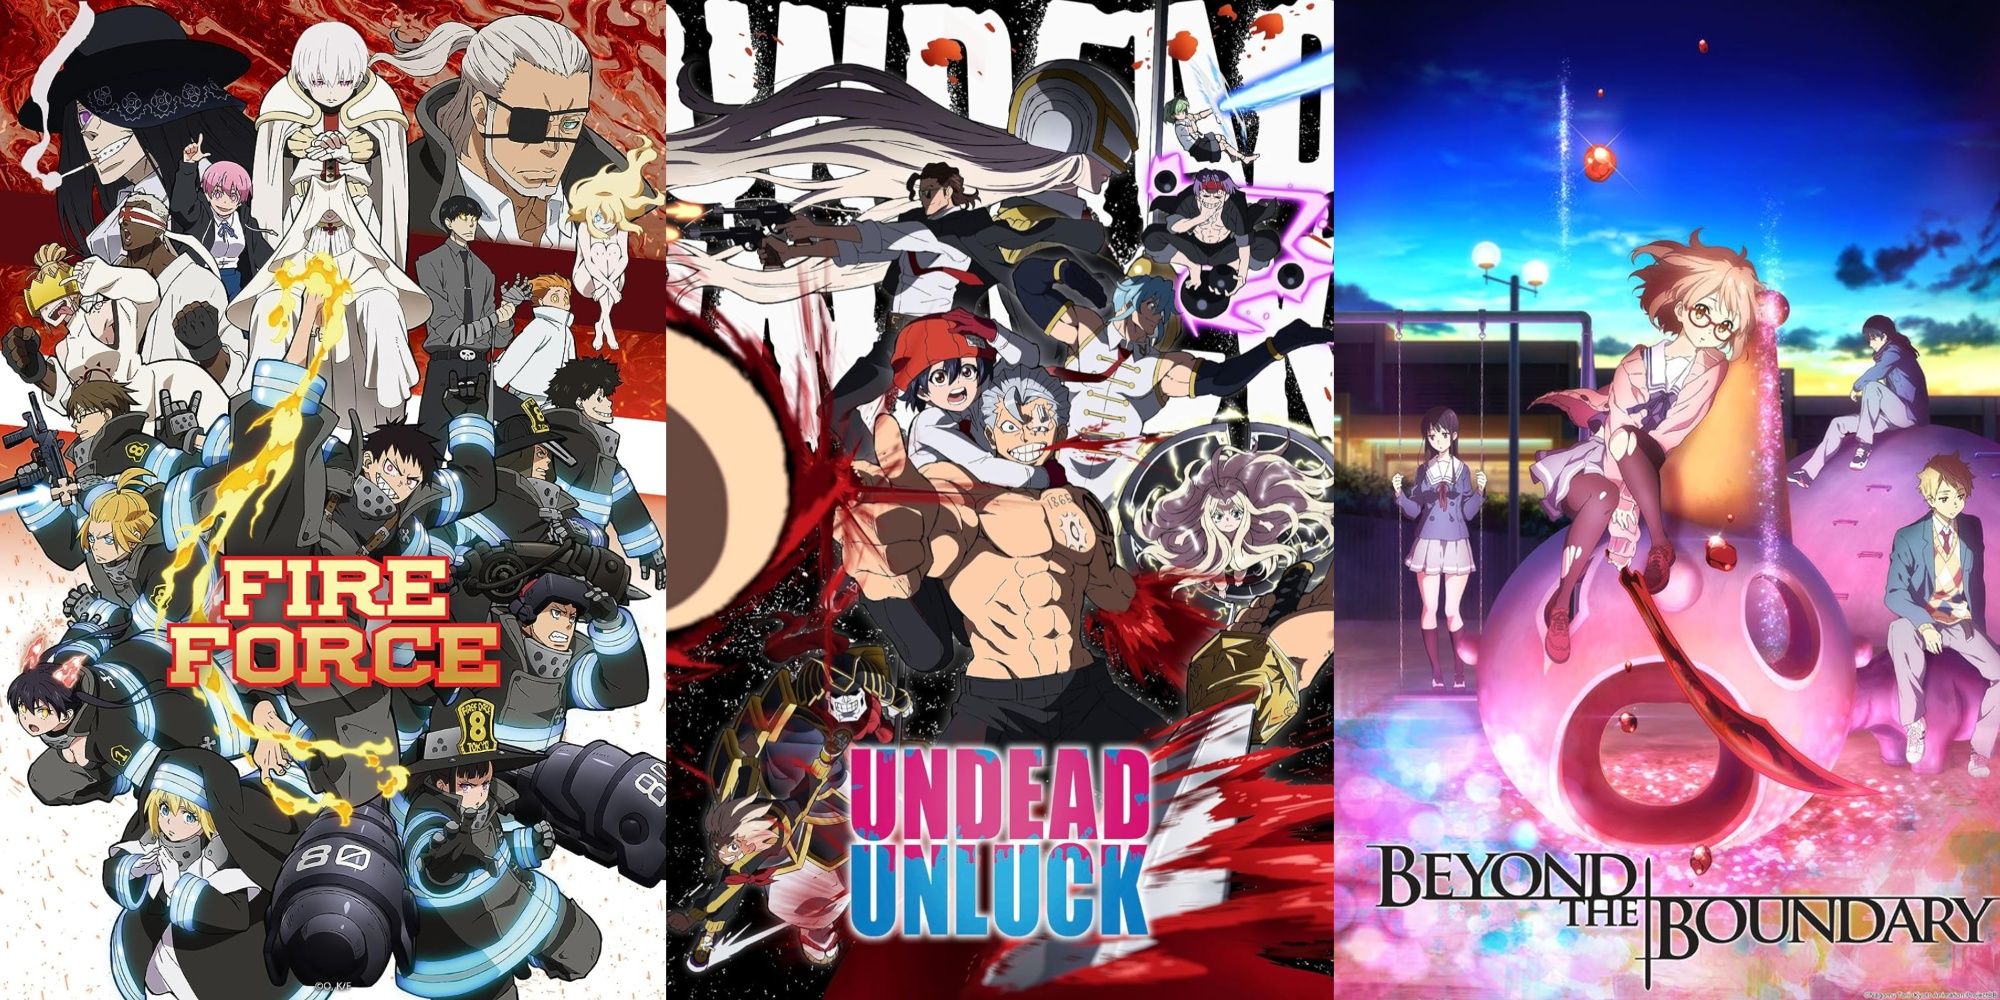 New Undead Unluck Anime Visual Rises from the Grave